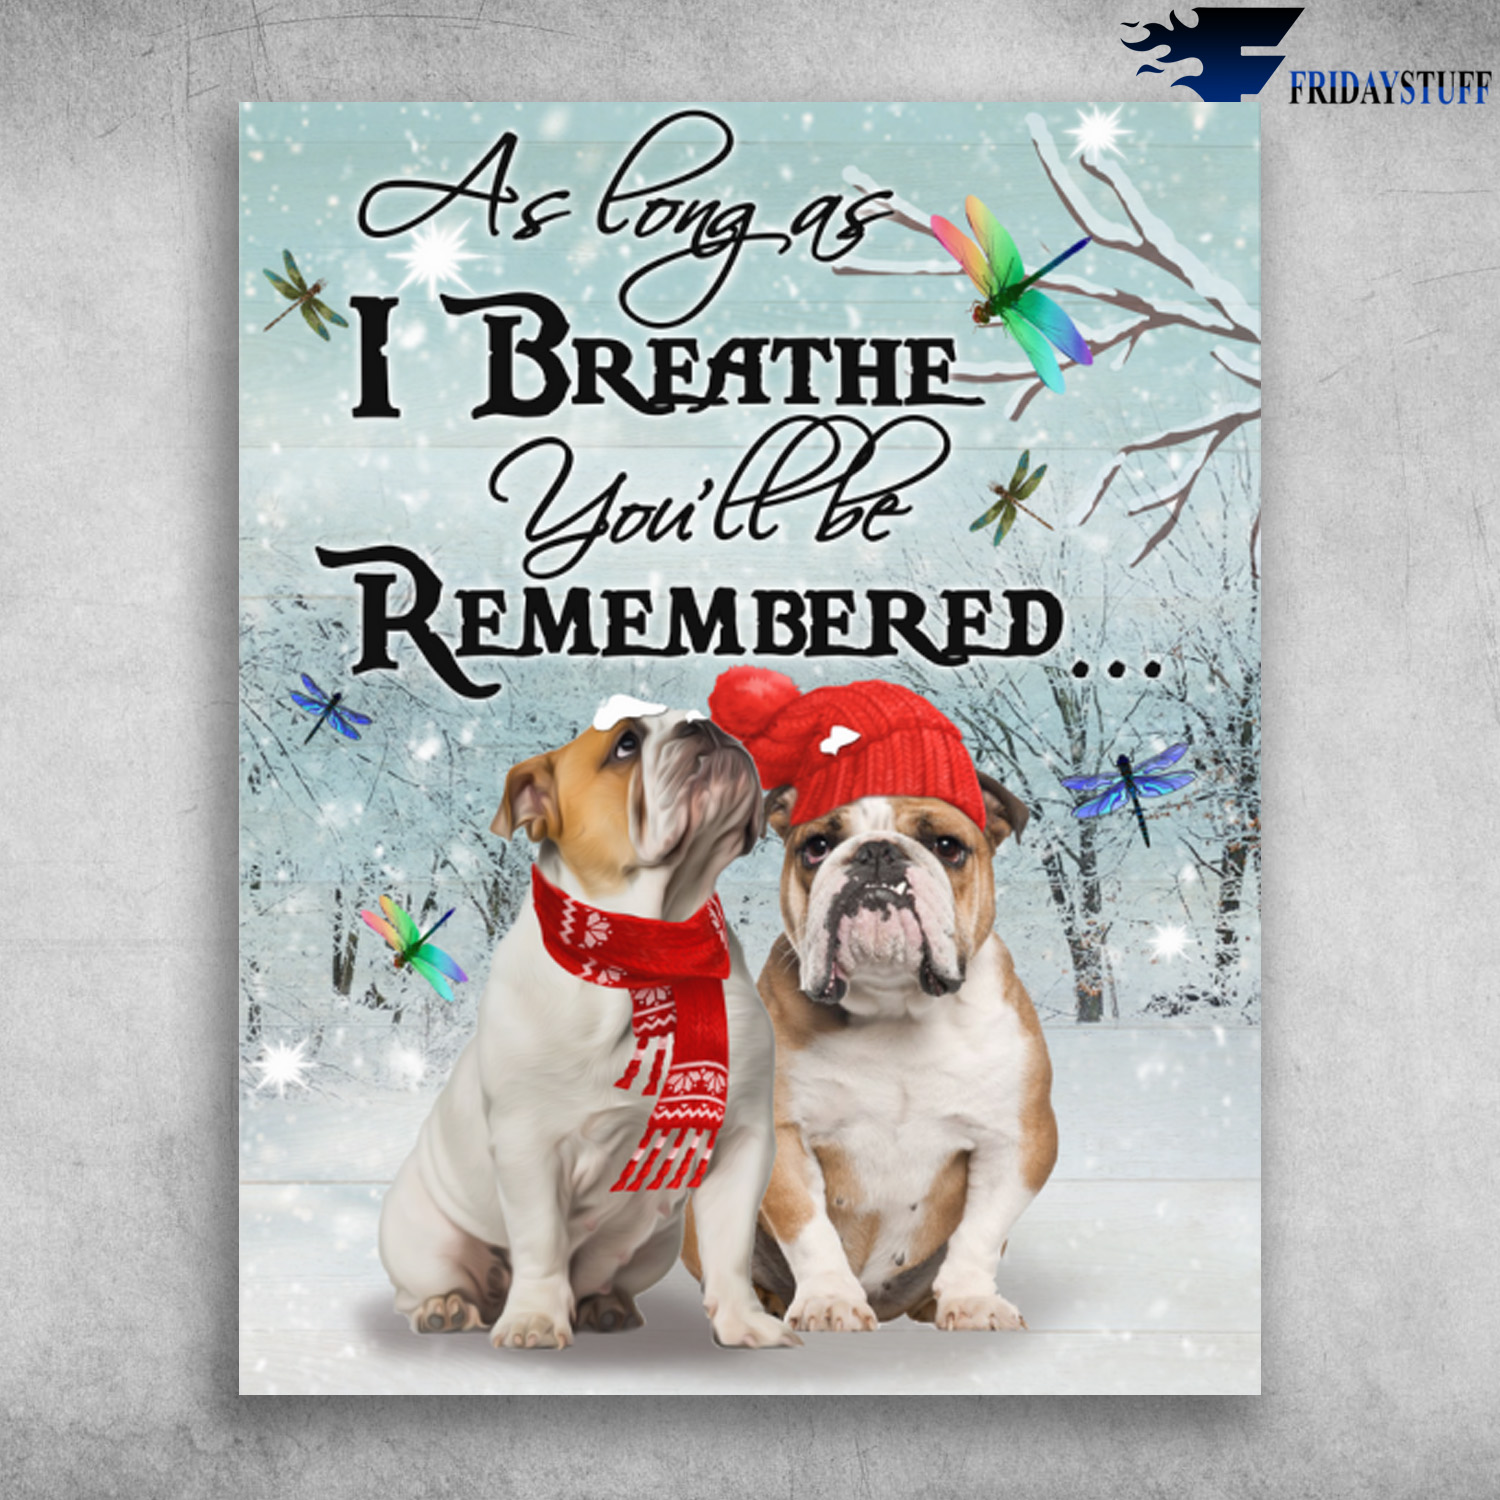 As Long As I Breathe You'll Be Remembered Bulldog On Winter Day With Colorful Dragonfly